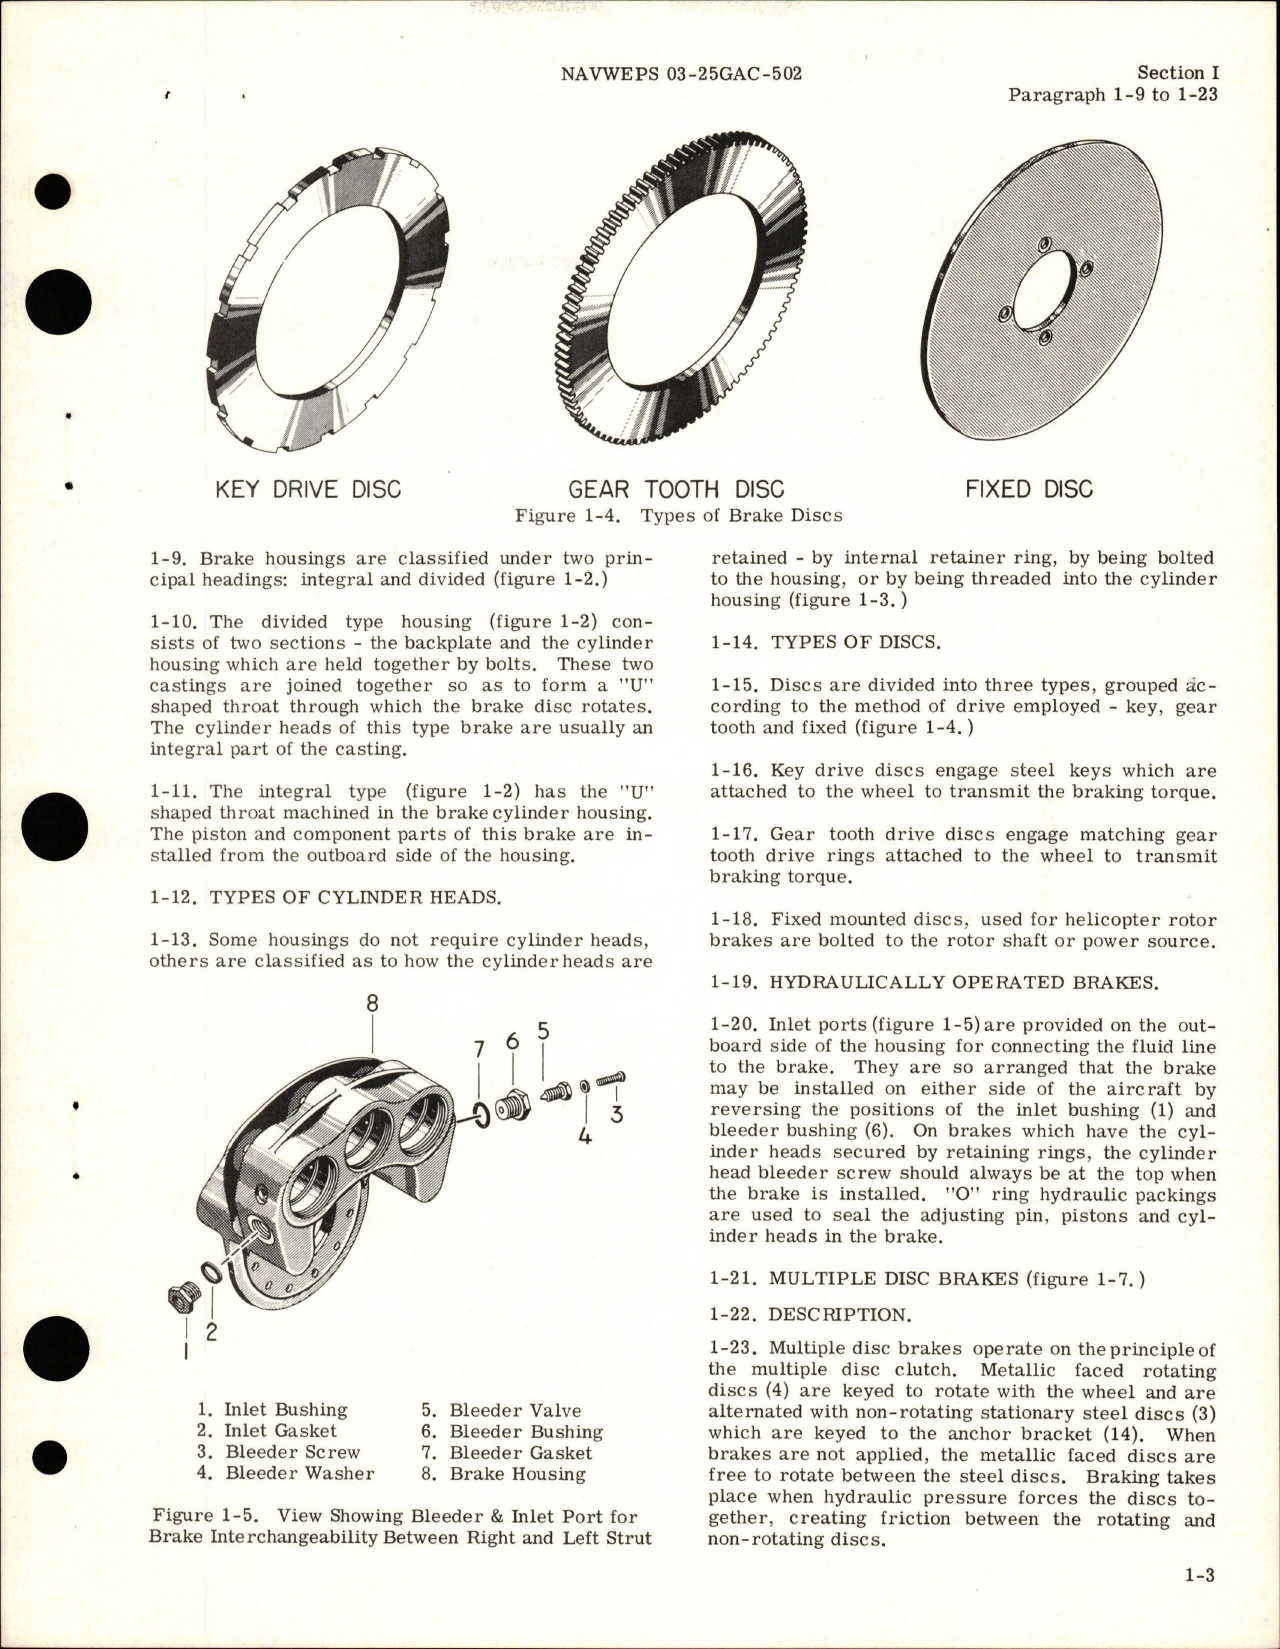 Sample page 7 from AirCorps Library document: Operation and Service Instructions for Disc Brakes